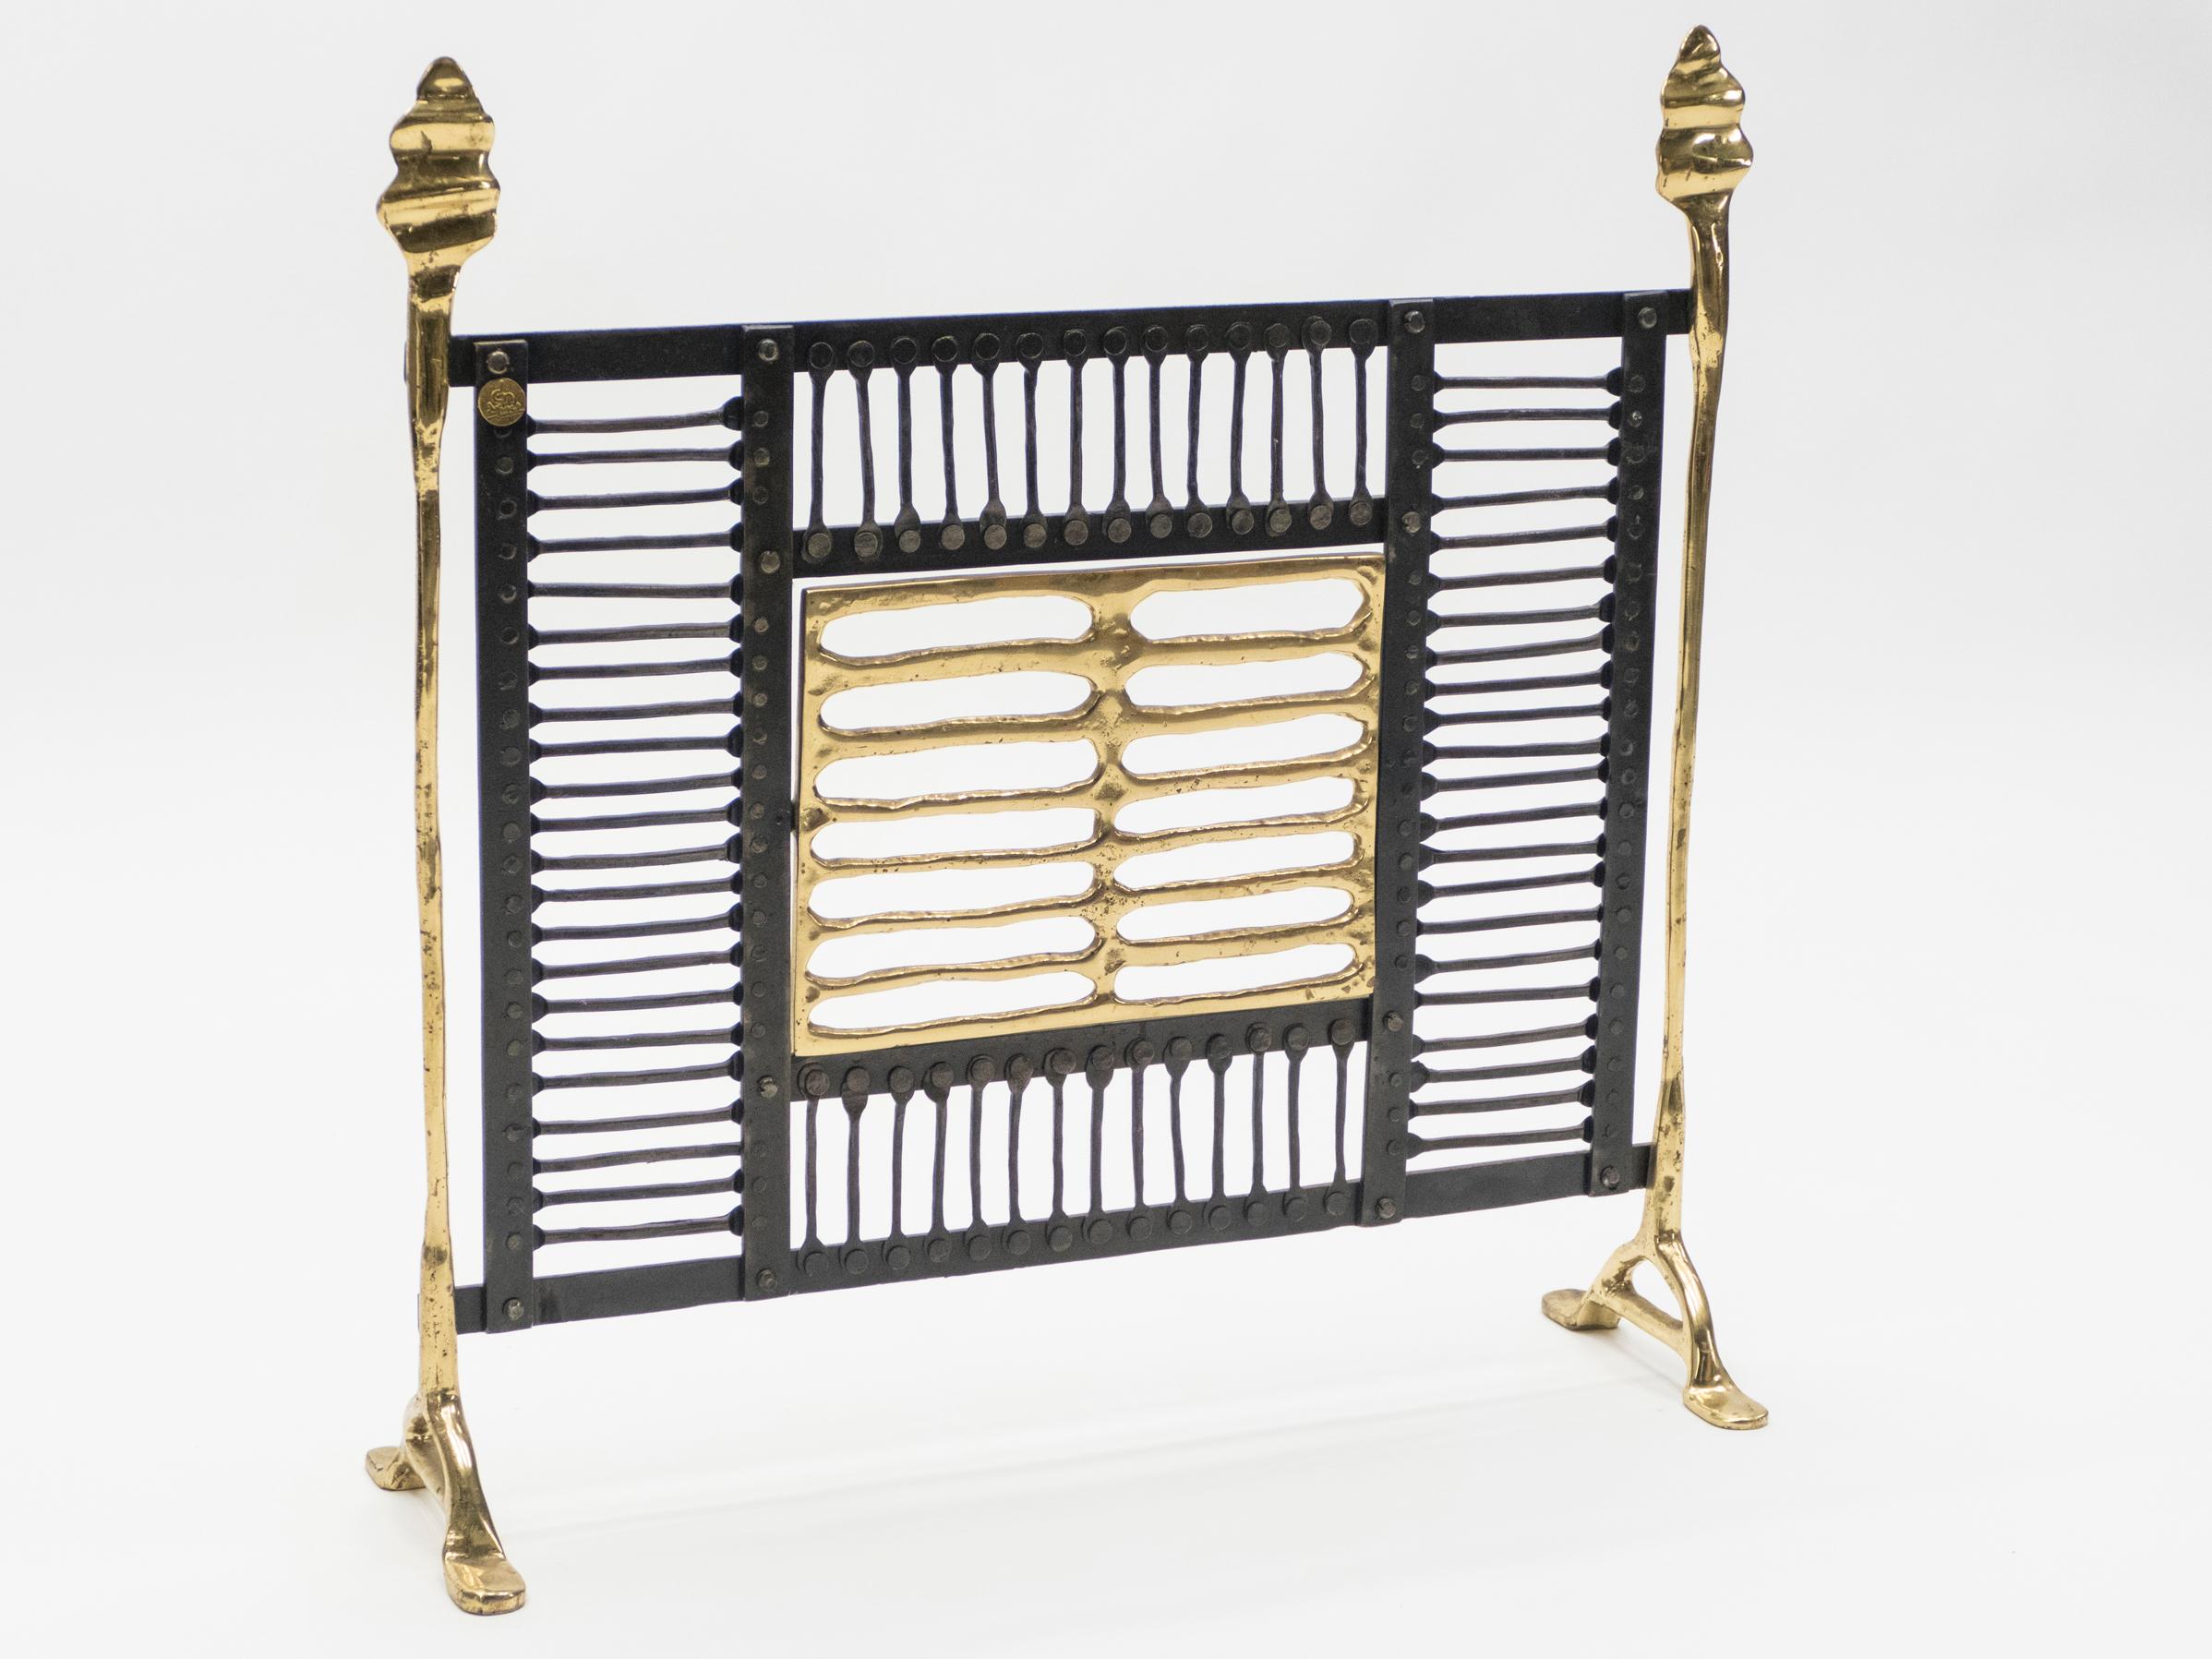 Garouste and Bonetti are known for their experimental and highly artistic designs, this fire screen, with its iron and brass collage and handcrafted look was heavily inspired by the French design duo. It features individually wrought iron bars,